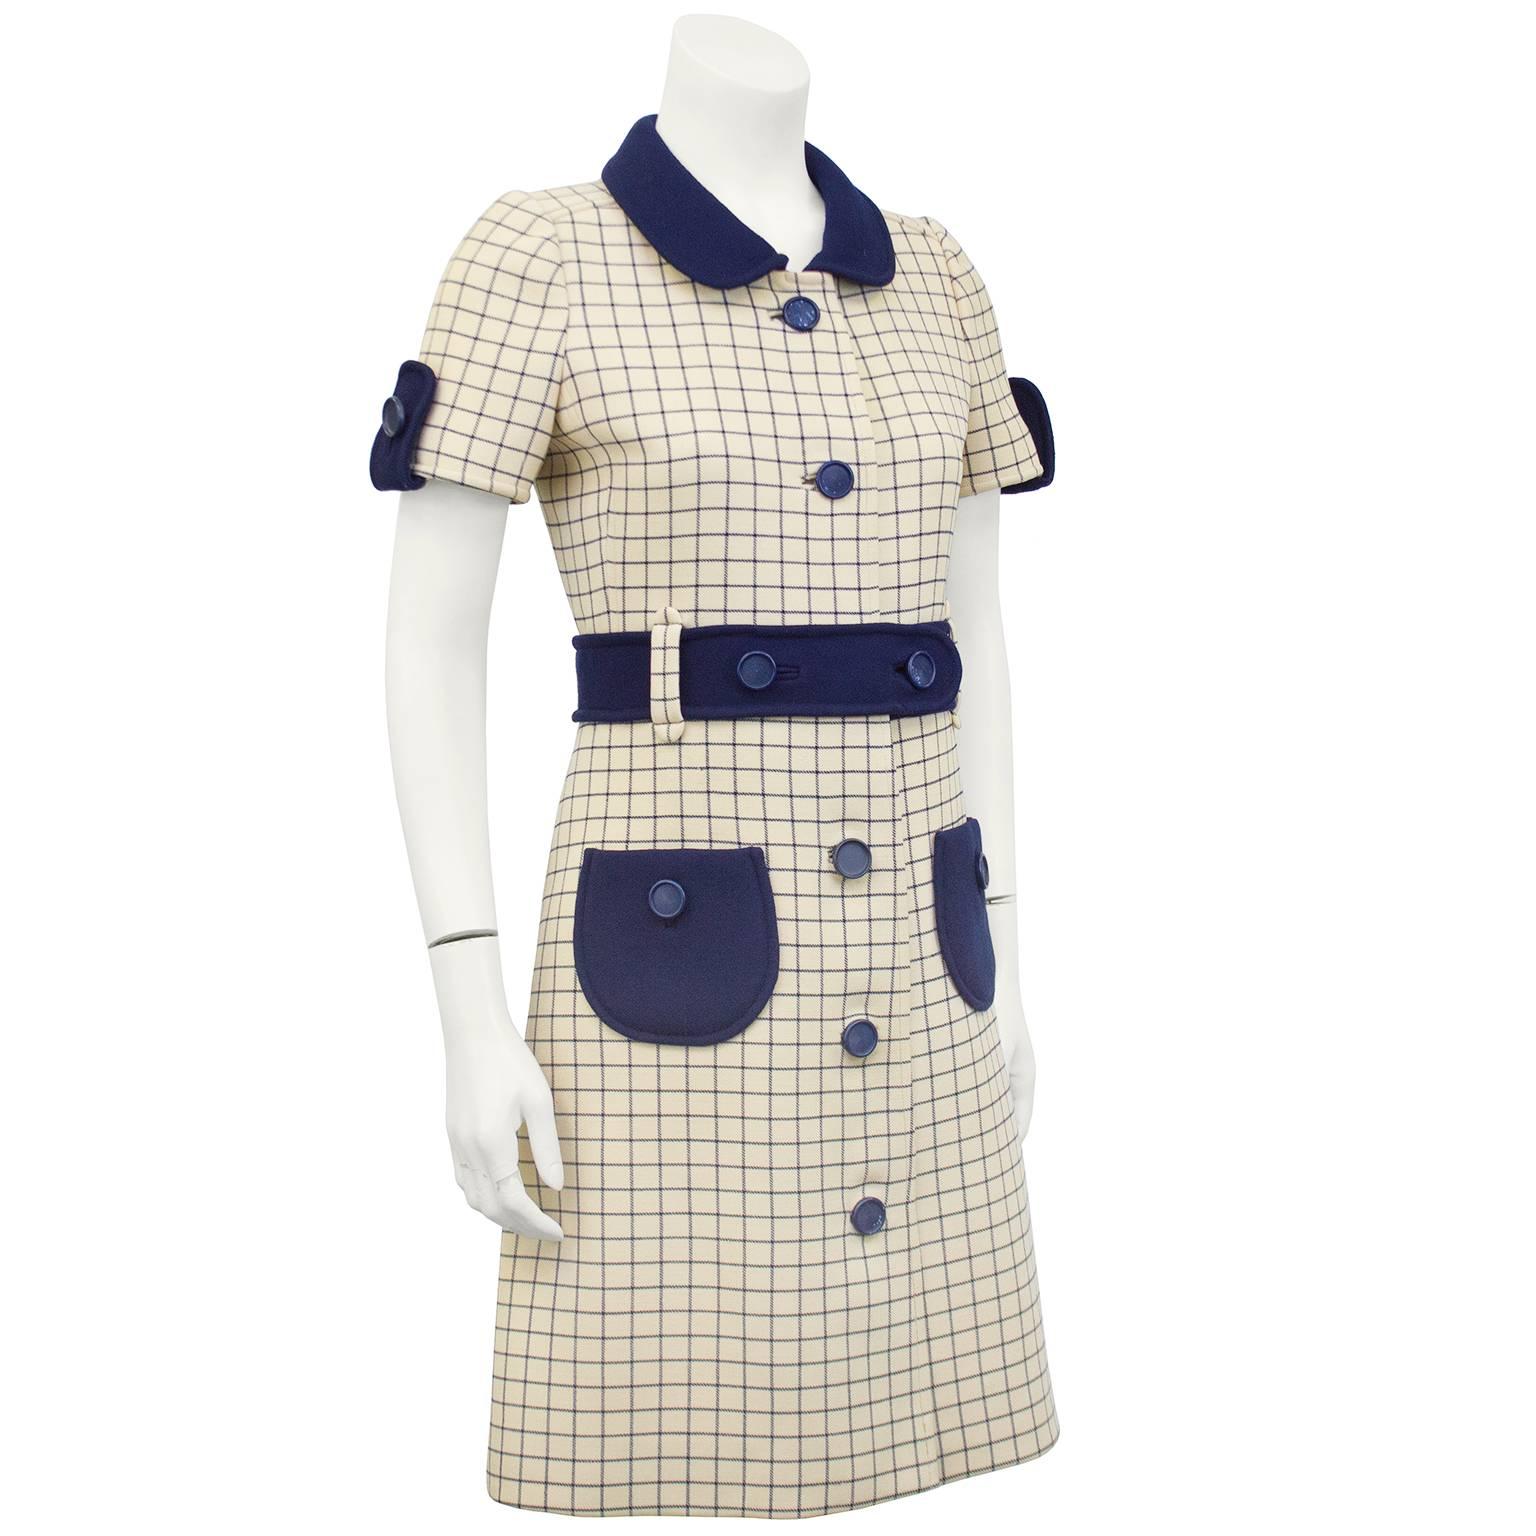 1960s chic mod Courreges day dress. Cream with thin navy blue window pane check. Navy blue peter pan collar, epaulets on the sleeve, buttons, waist belt and patch pockets. Cream silk lining. Excellent vintage condition. Fits like a US 2. 

Sleeve